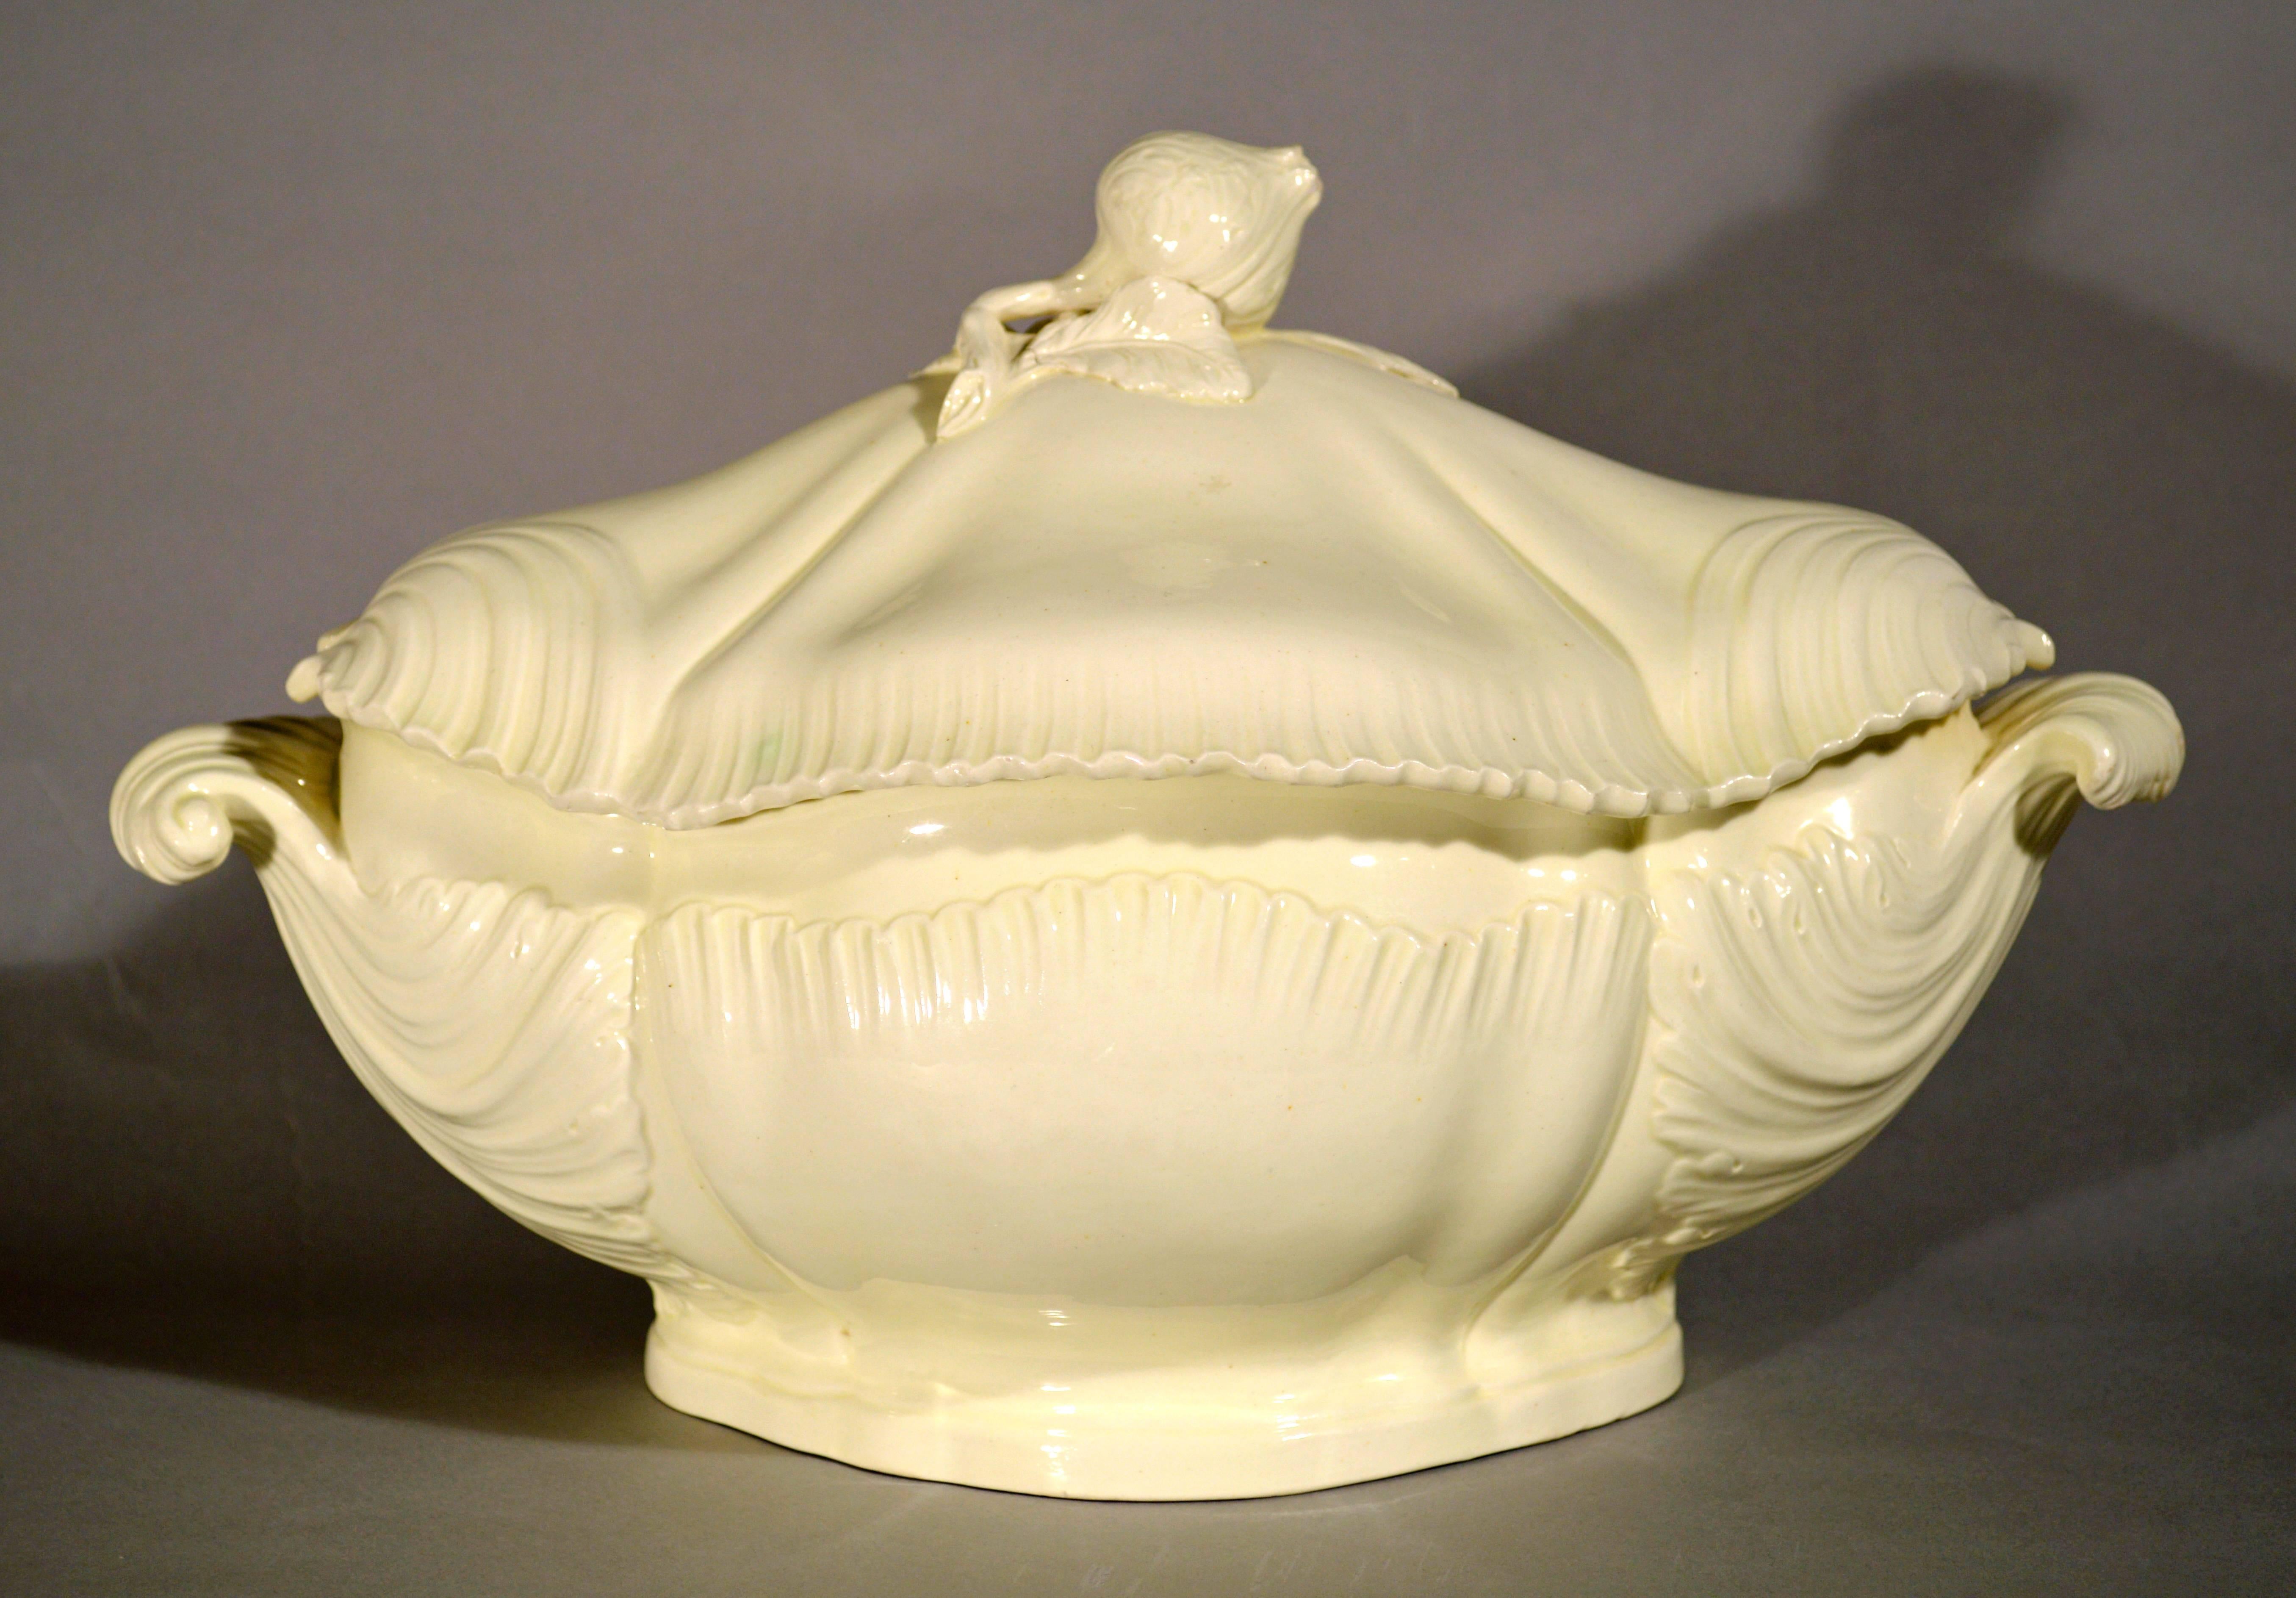 The beautiful plain-creamware tureen is of bombe form and has large scroll shell handles with their moulded terminals swirling almost a quarter of the way back onto the body of the tureen. 

The central section with moulded reeding. The cover is